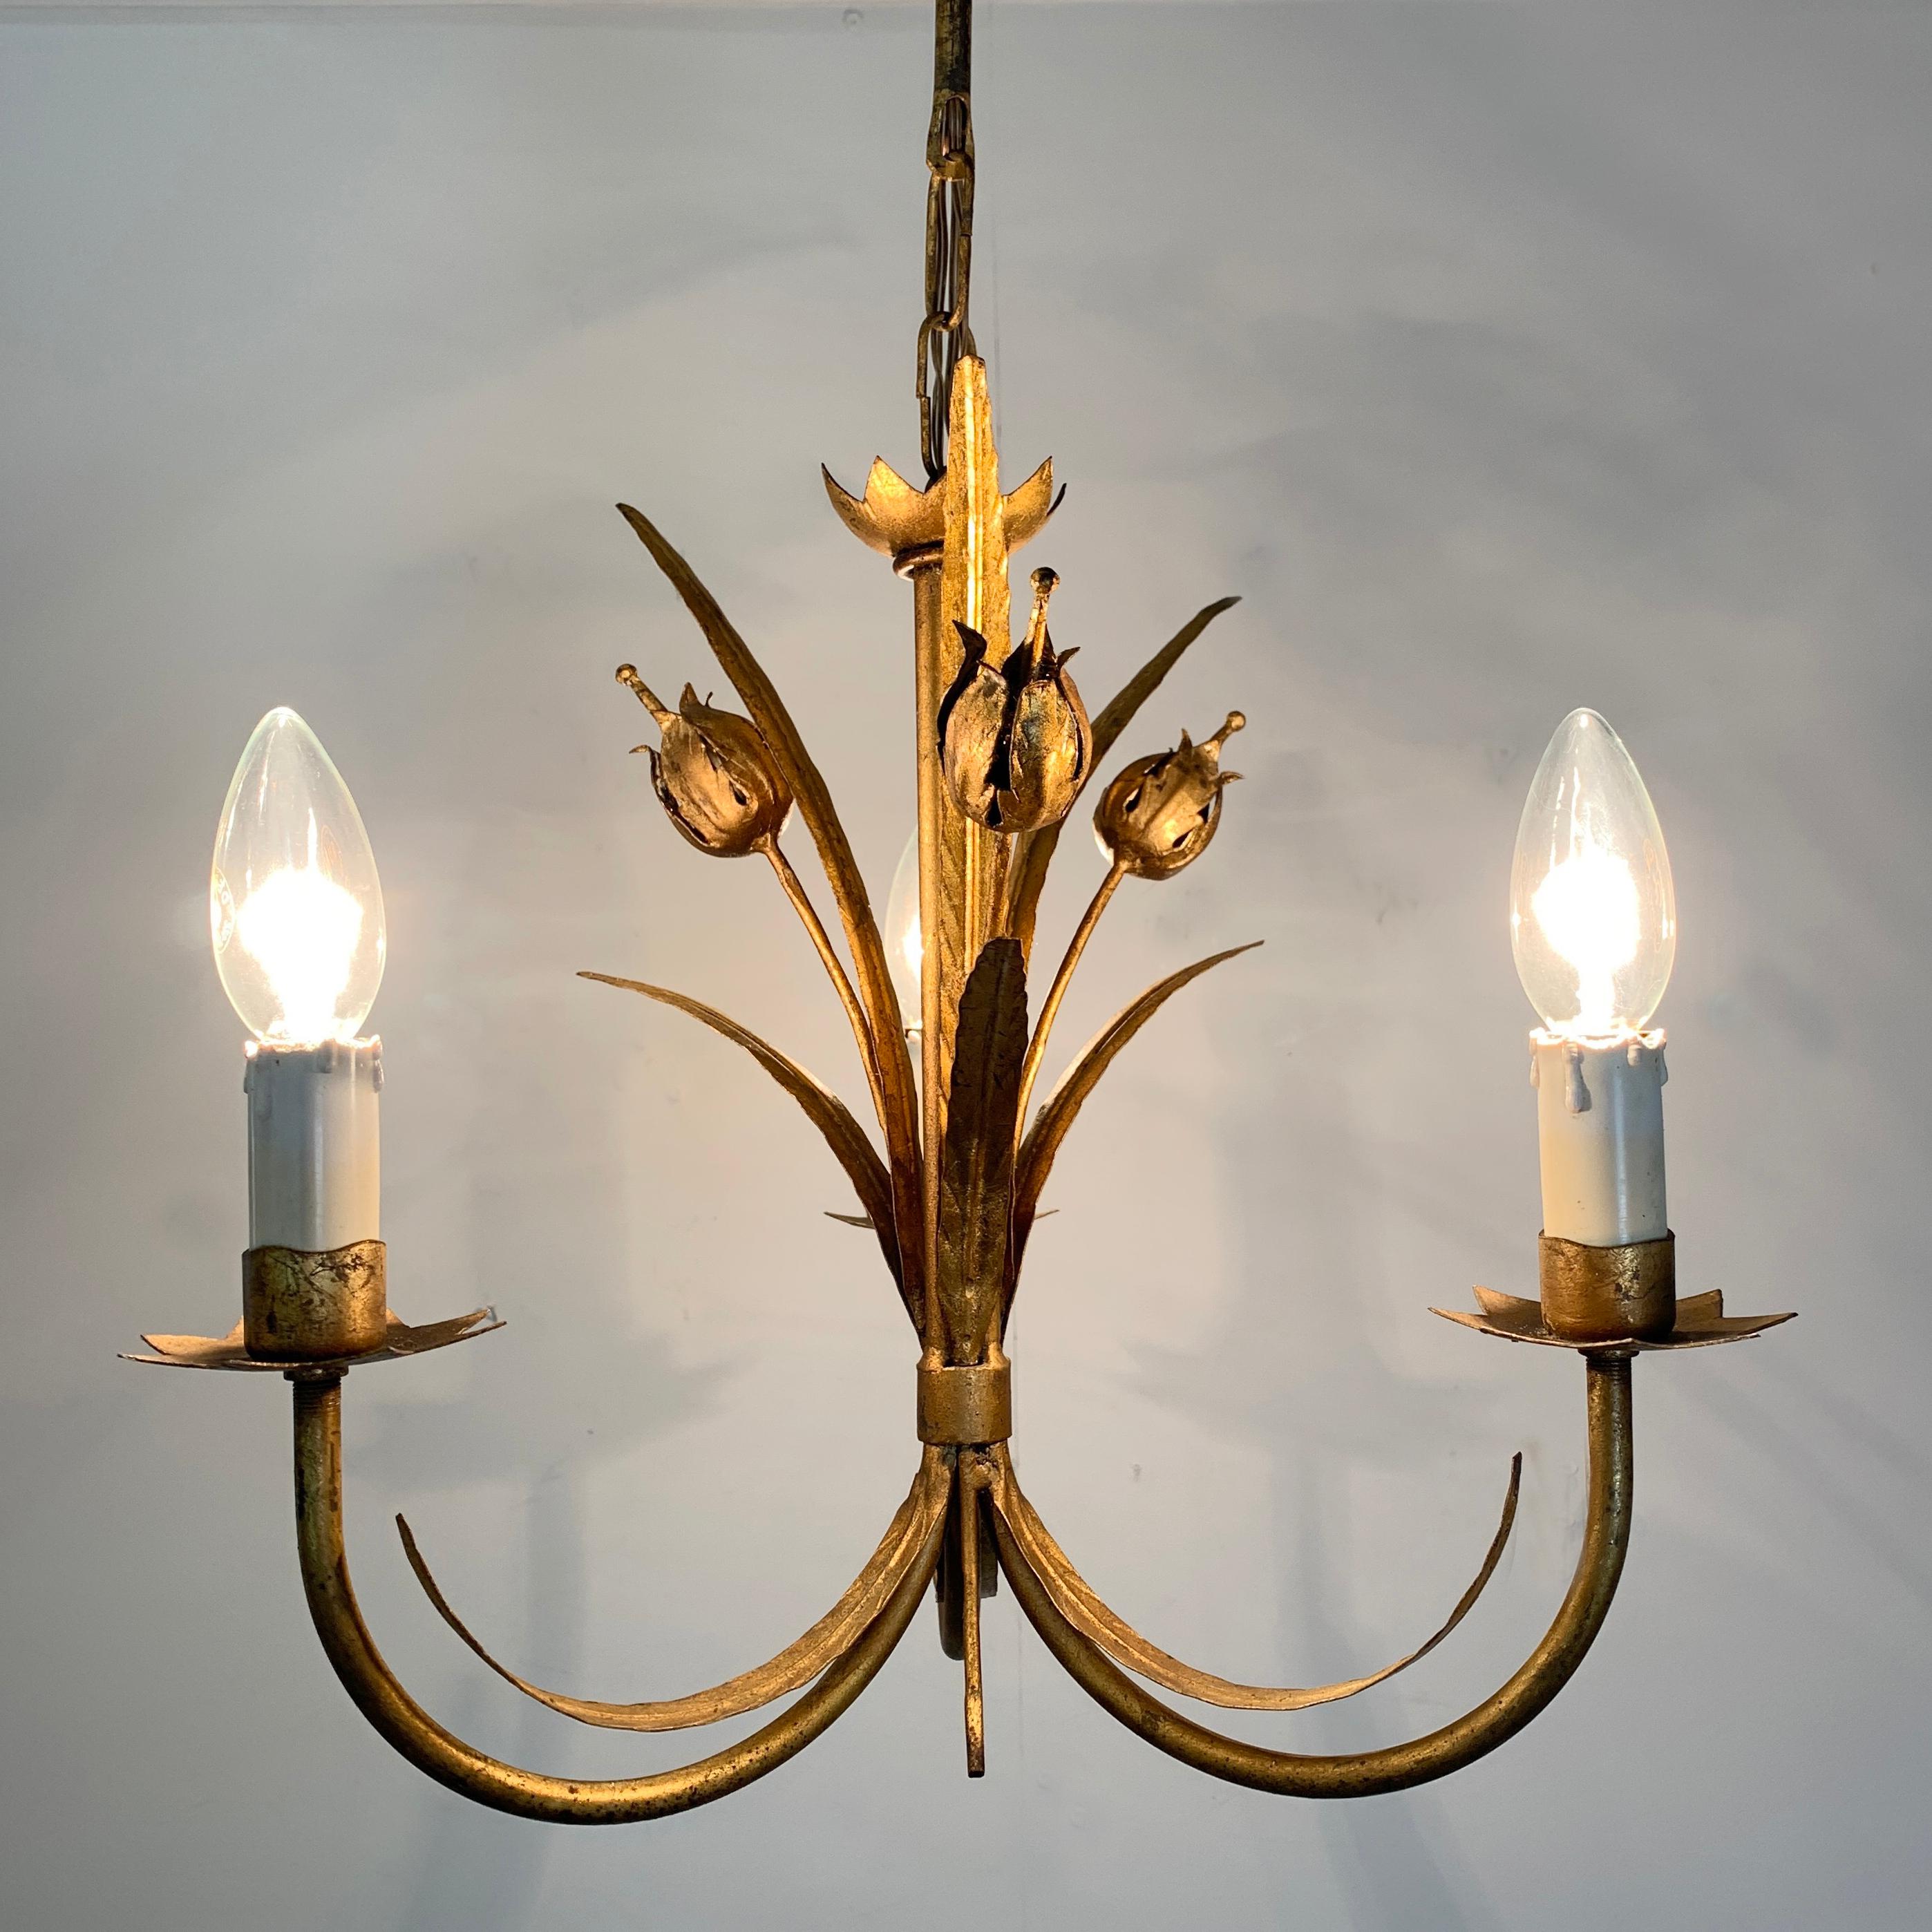 'Ferro Art' seed pod gilt chandelier, Spain, circa 1950s
Lovely smaller size chandelier with the Classic Ferro seed pod and leaf design
Measures: 50Cm total height, 36Cm width, 11Cm rose width
3 bulb holders, E14 Bulbs
PAT tested
 
The light